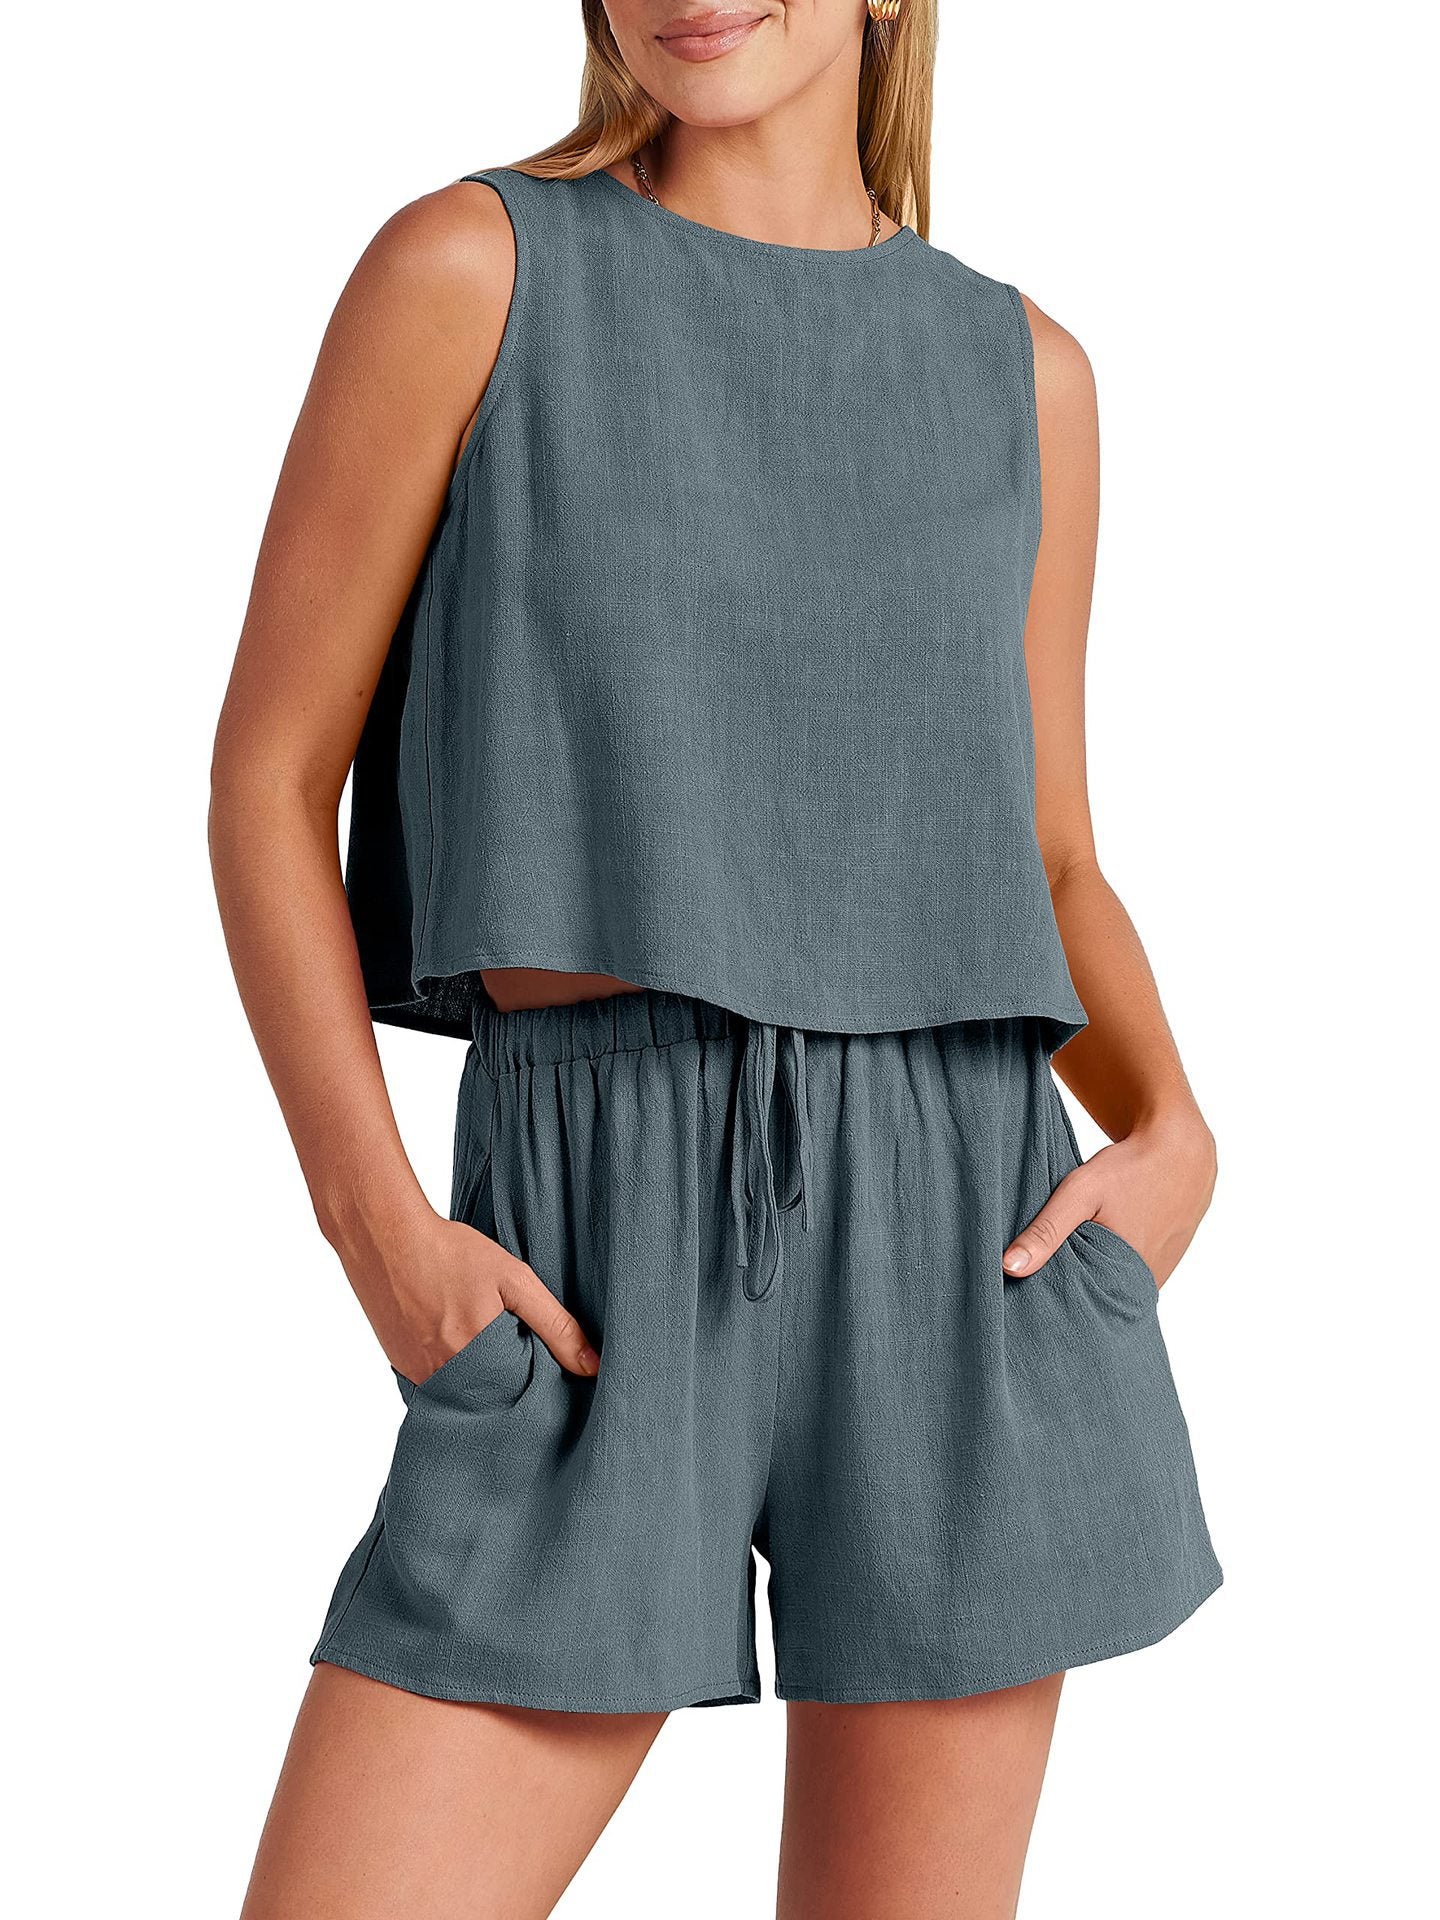 Women's Casual Sleeveless Loose Cotton Linen Shorts Two-piece Suit